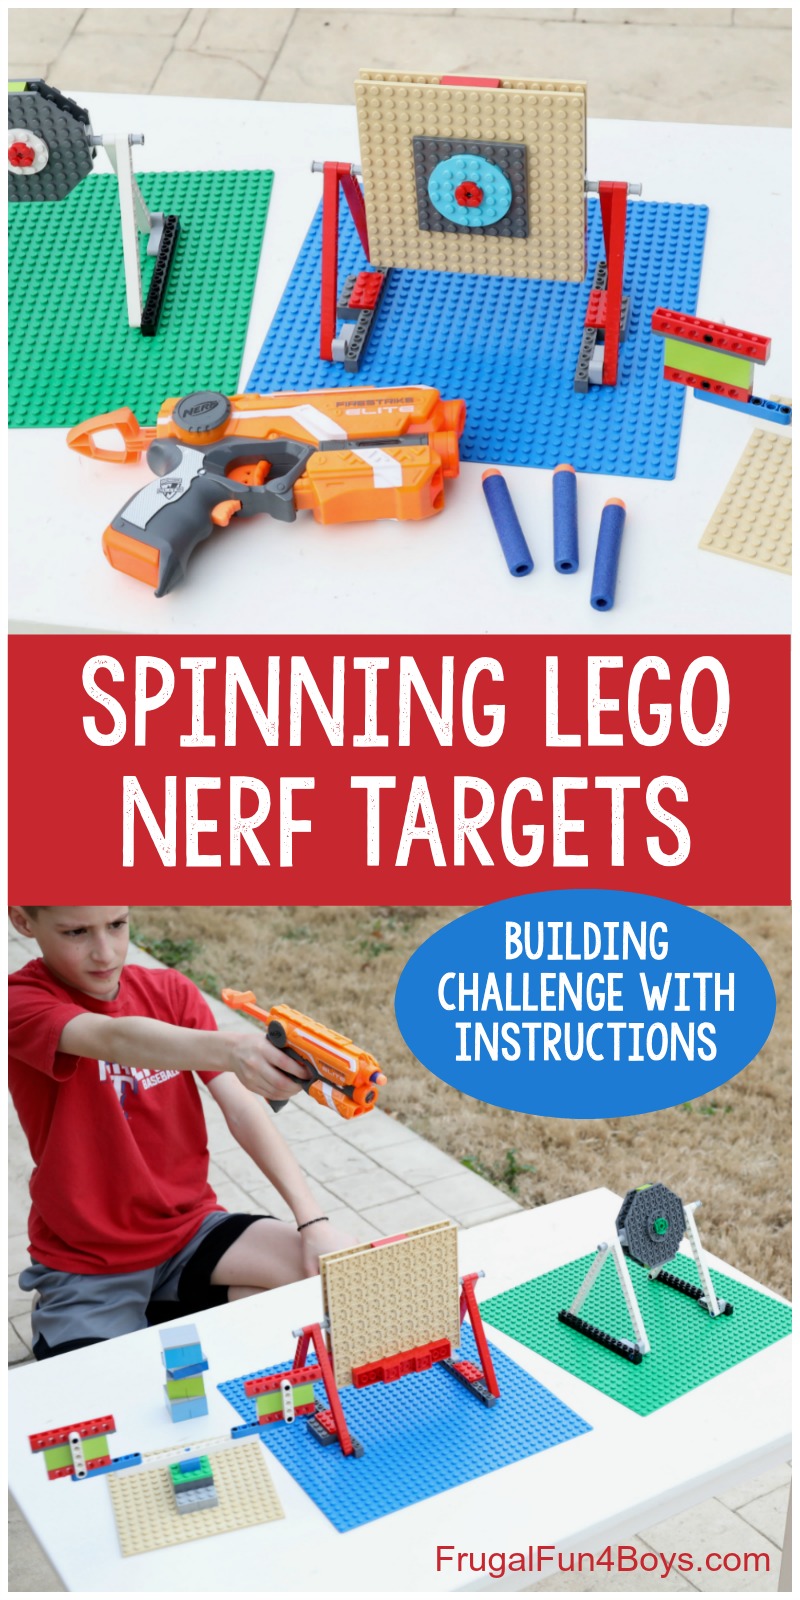 How to Build Spinning LEGO Nerf Targets